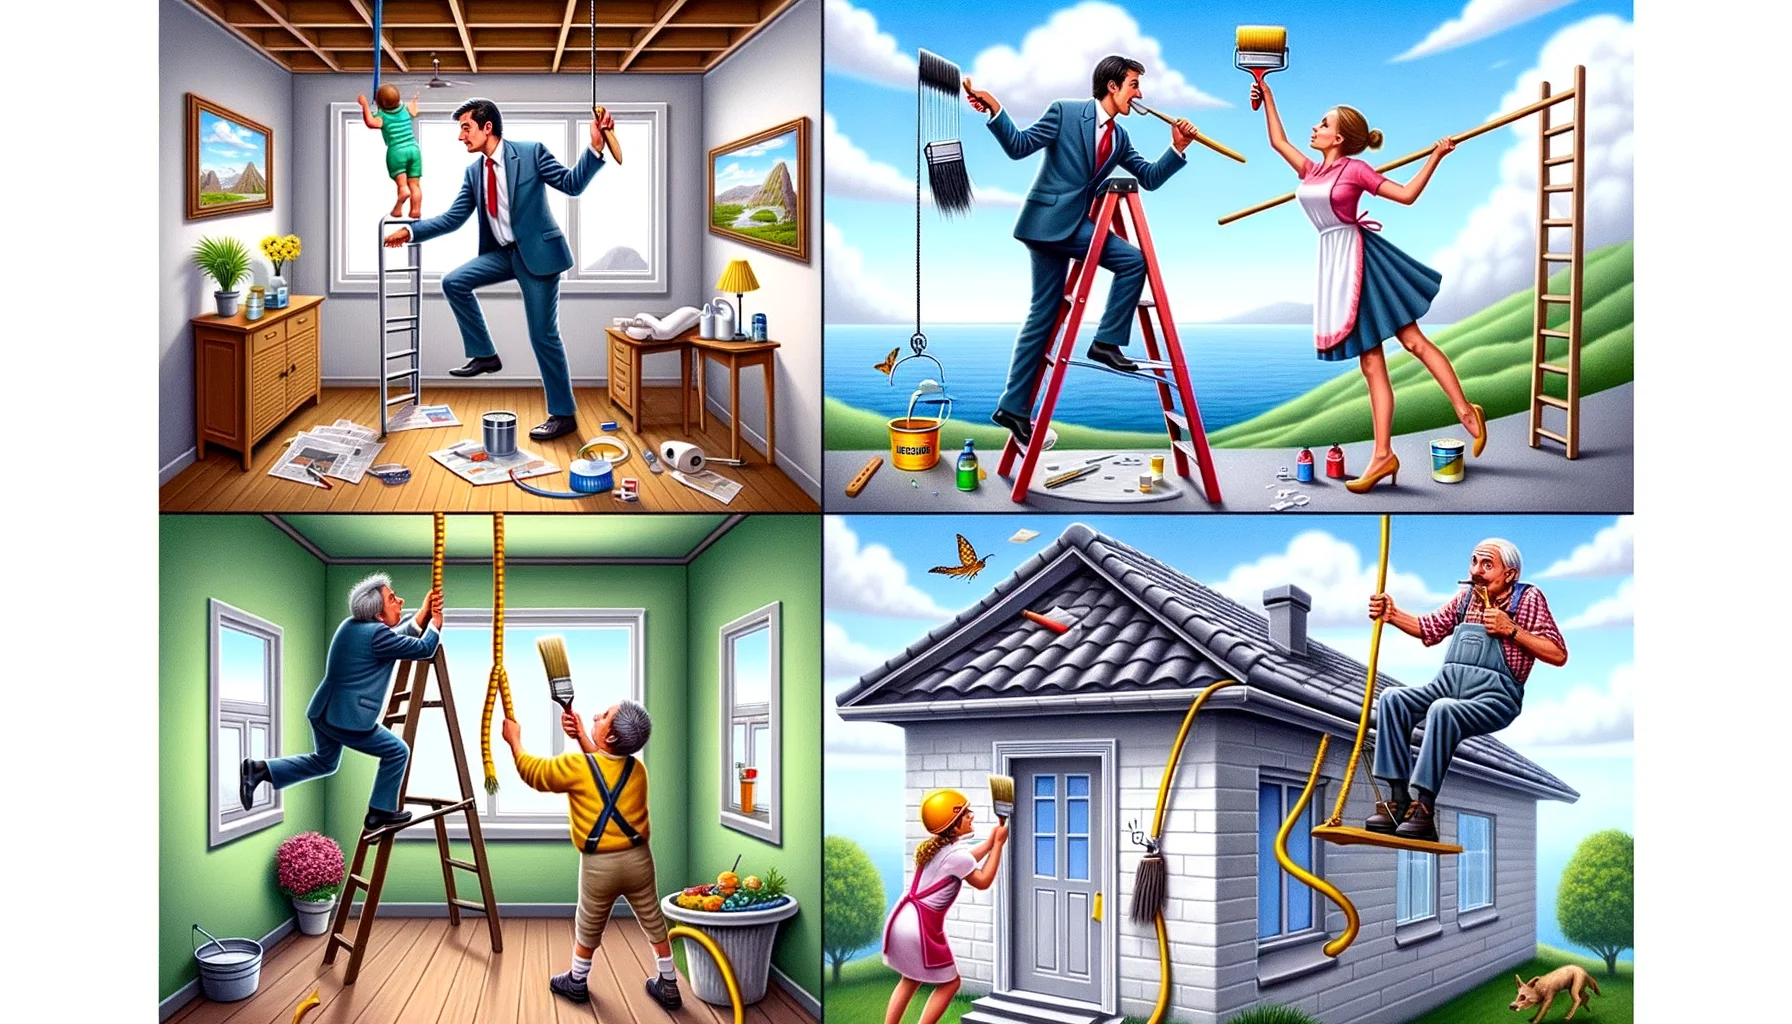 Create a humorous image that shows how to pass a four-point home inspection. In this playful scenario, envision four different rooms, each presenting a unique challenge. In the first room, a man in a suit is seen precariously balancing on a ladder, paintbrush in mouth, attempting to refresh the paint without spilling. In the second scene, a woman is seen wrestling a garden hose as she tries to clean the gutters. The third room features a group of children devising a pulley system to fix a sagging ceiling. The fourth scene features an elderly gentleman defying gravity and expectations by adhering to the roof to replace a missing tile.